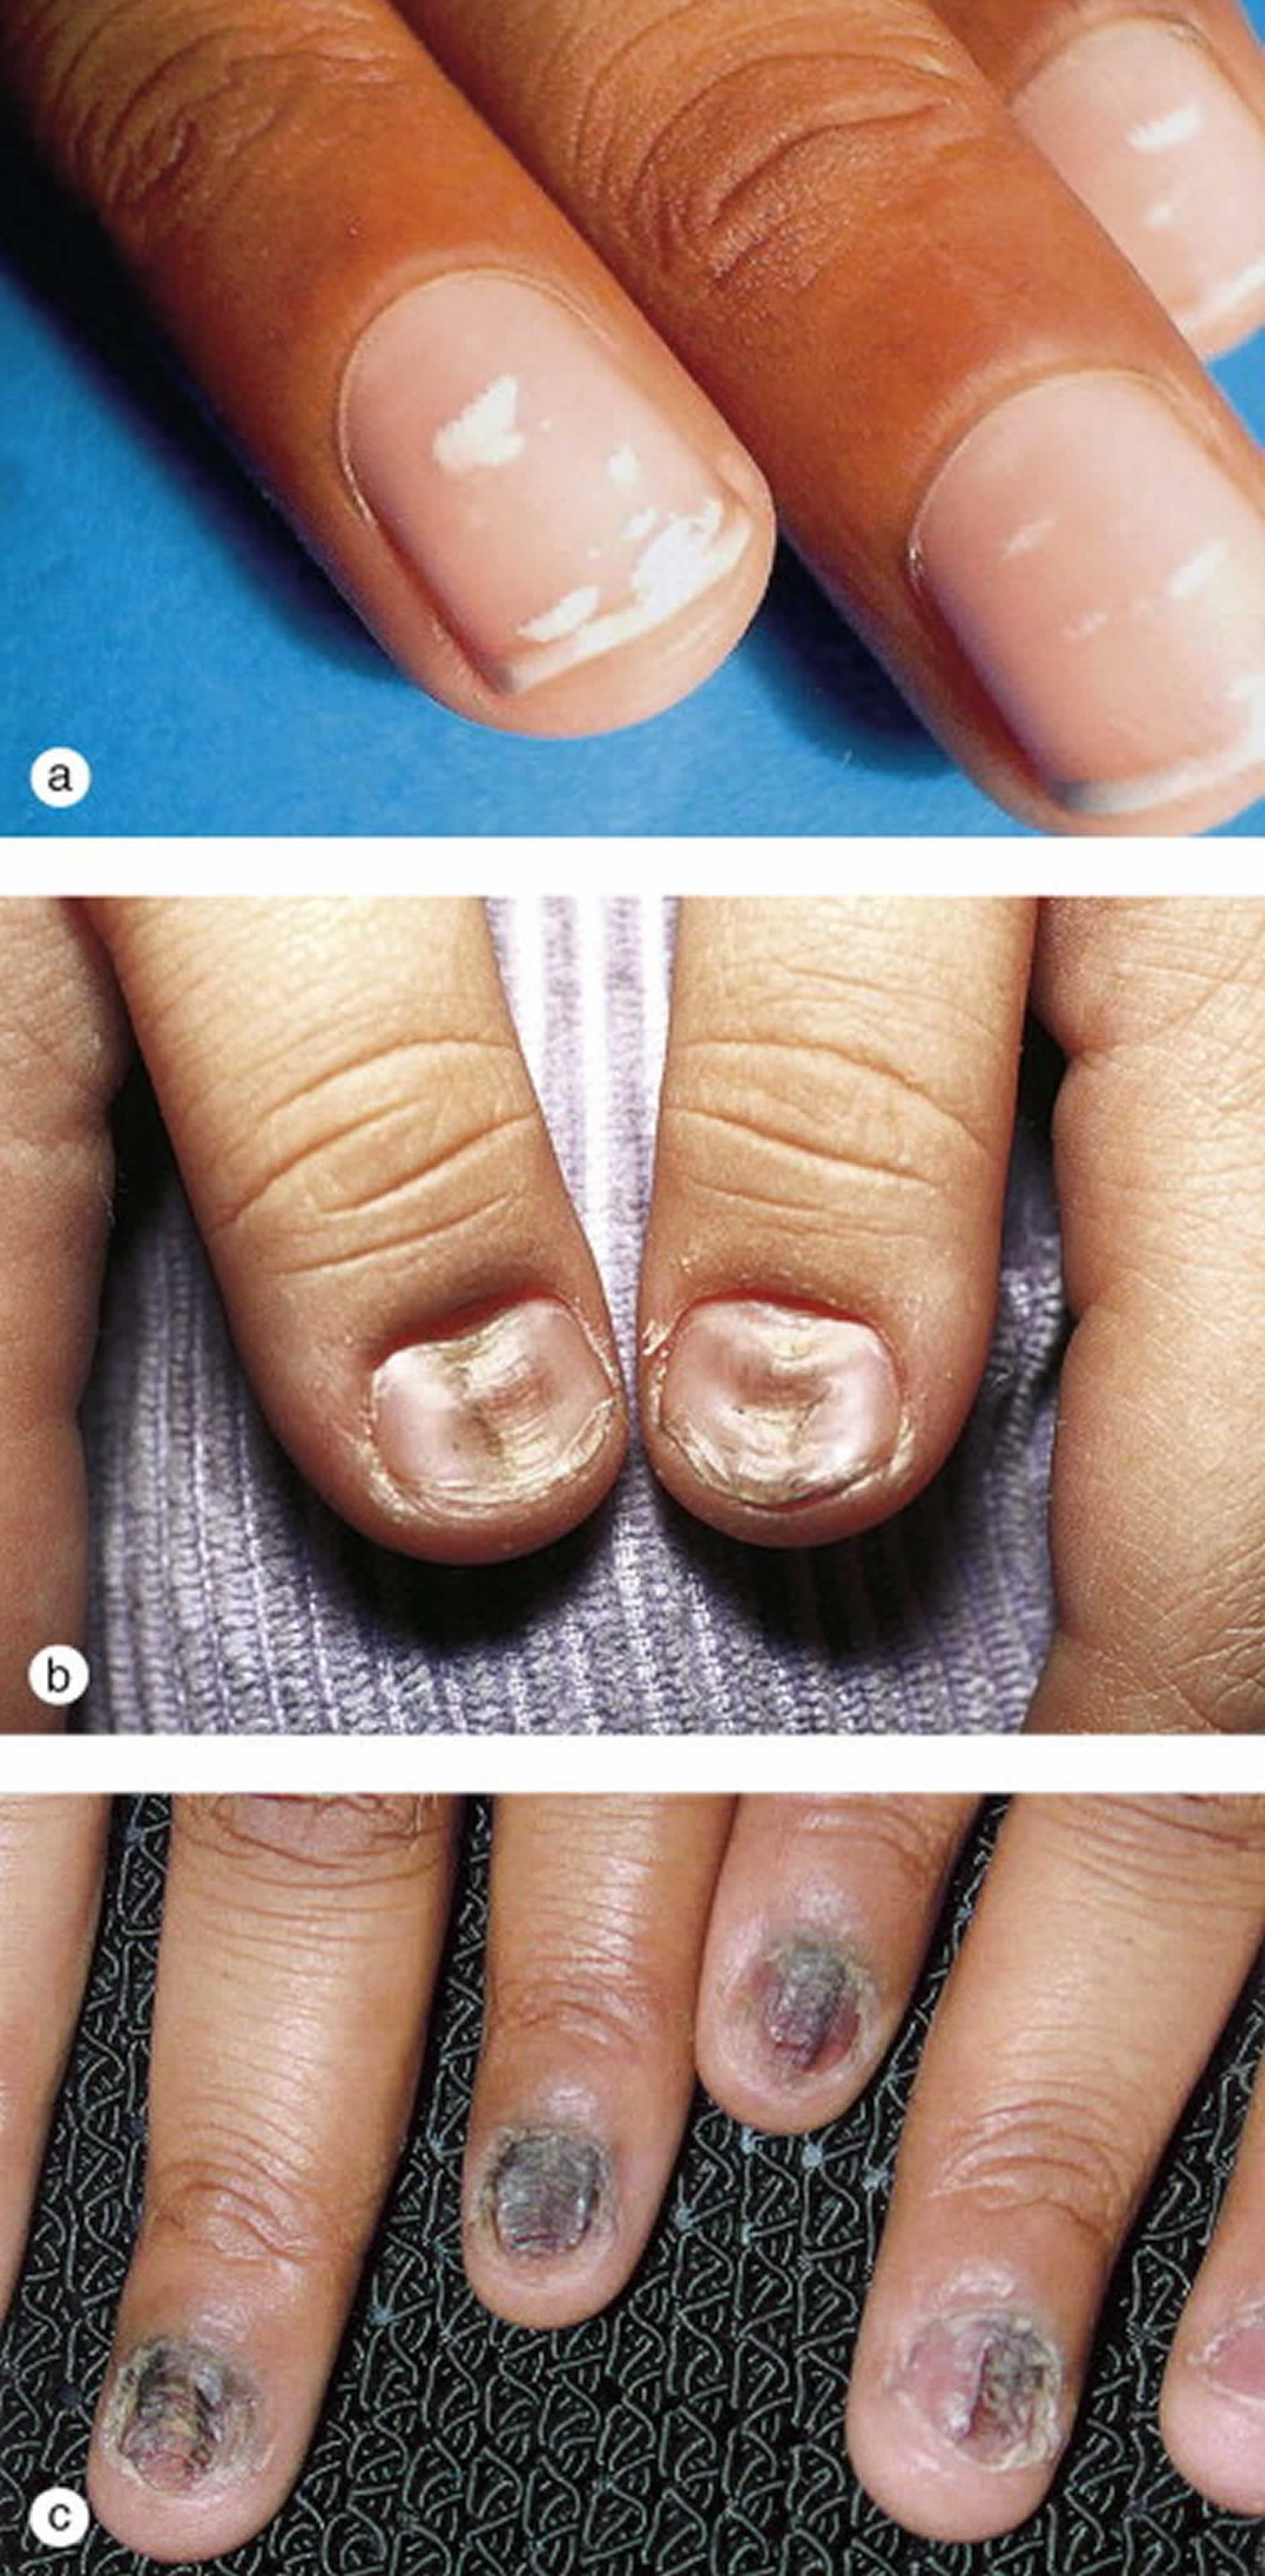 Pathogenesis, Clinical Signs and Treatment Recommendations in Brittle Nails:  A Review